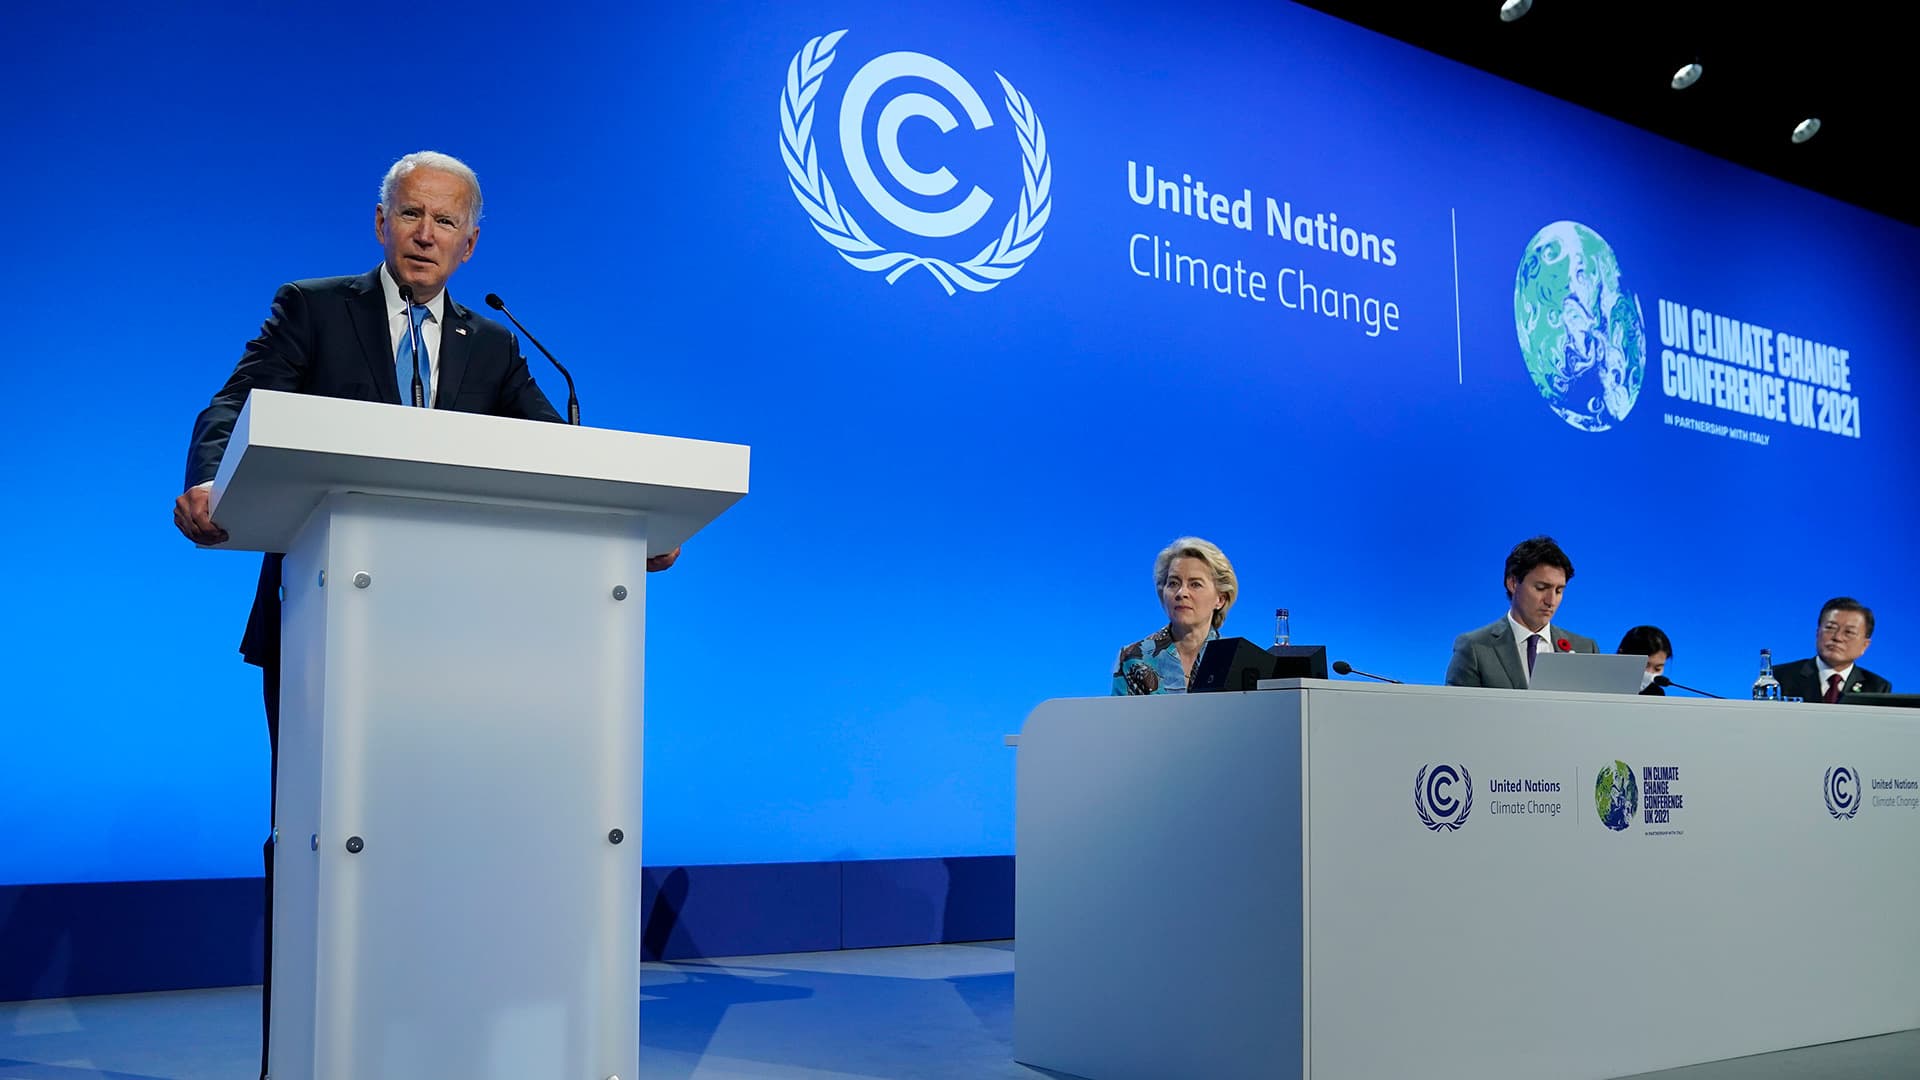 Joe Biden speaking at a podium, with other world leaders seated next to him, in front of a blue screen with the words United Nations Climate Change